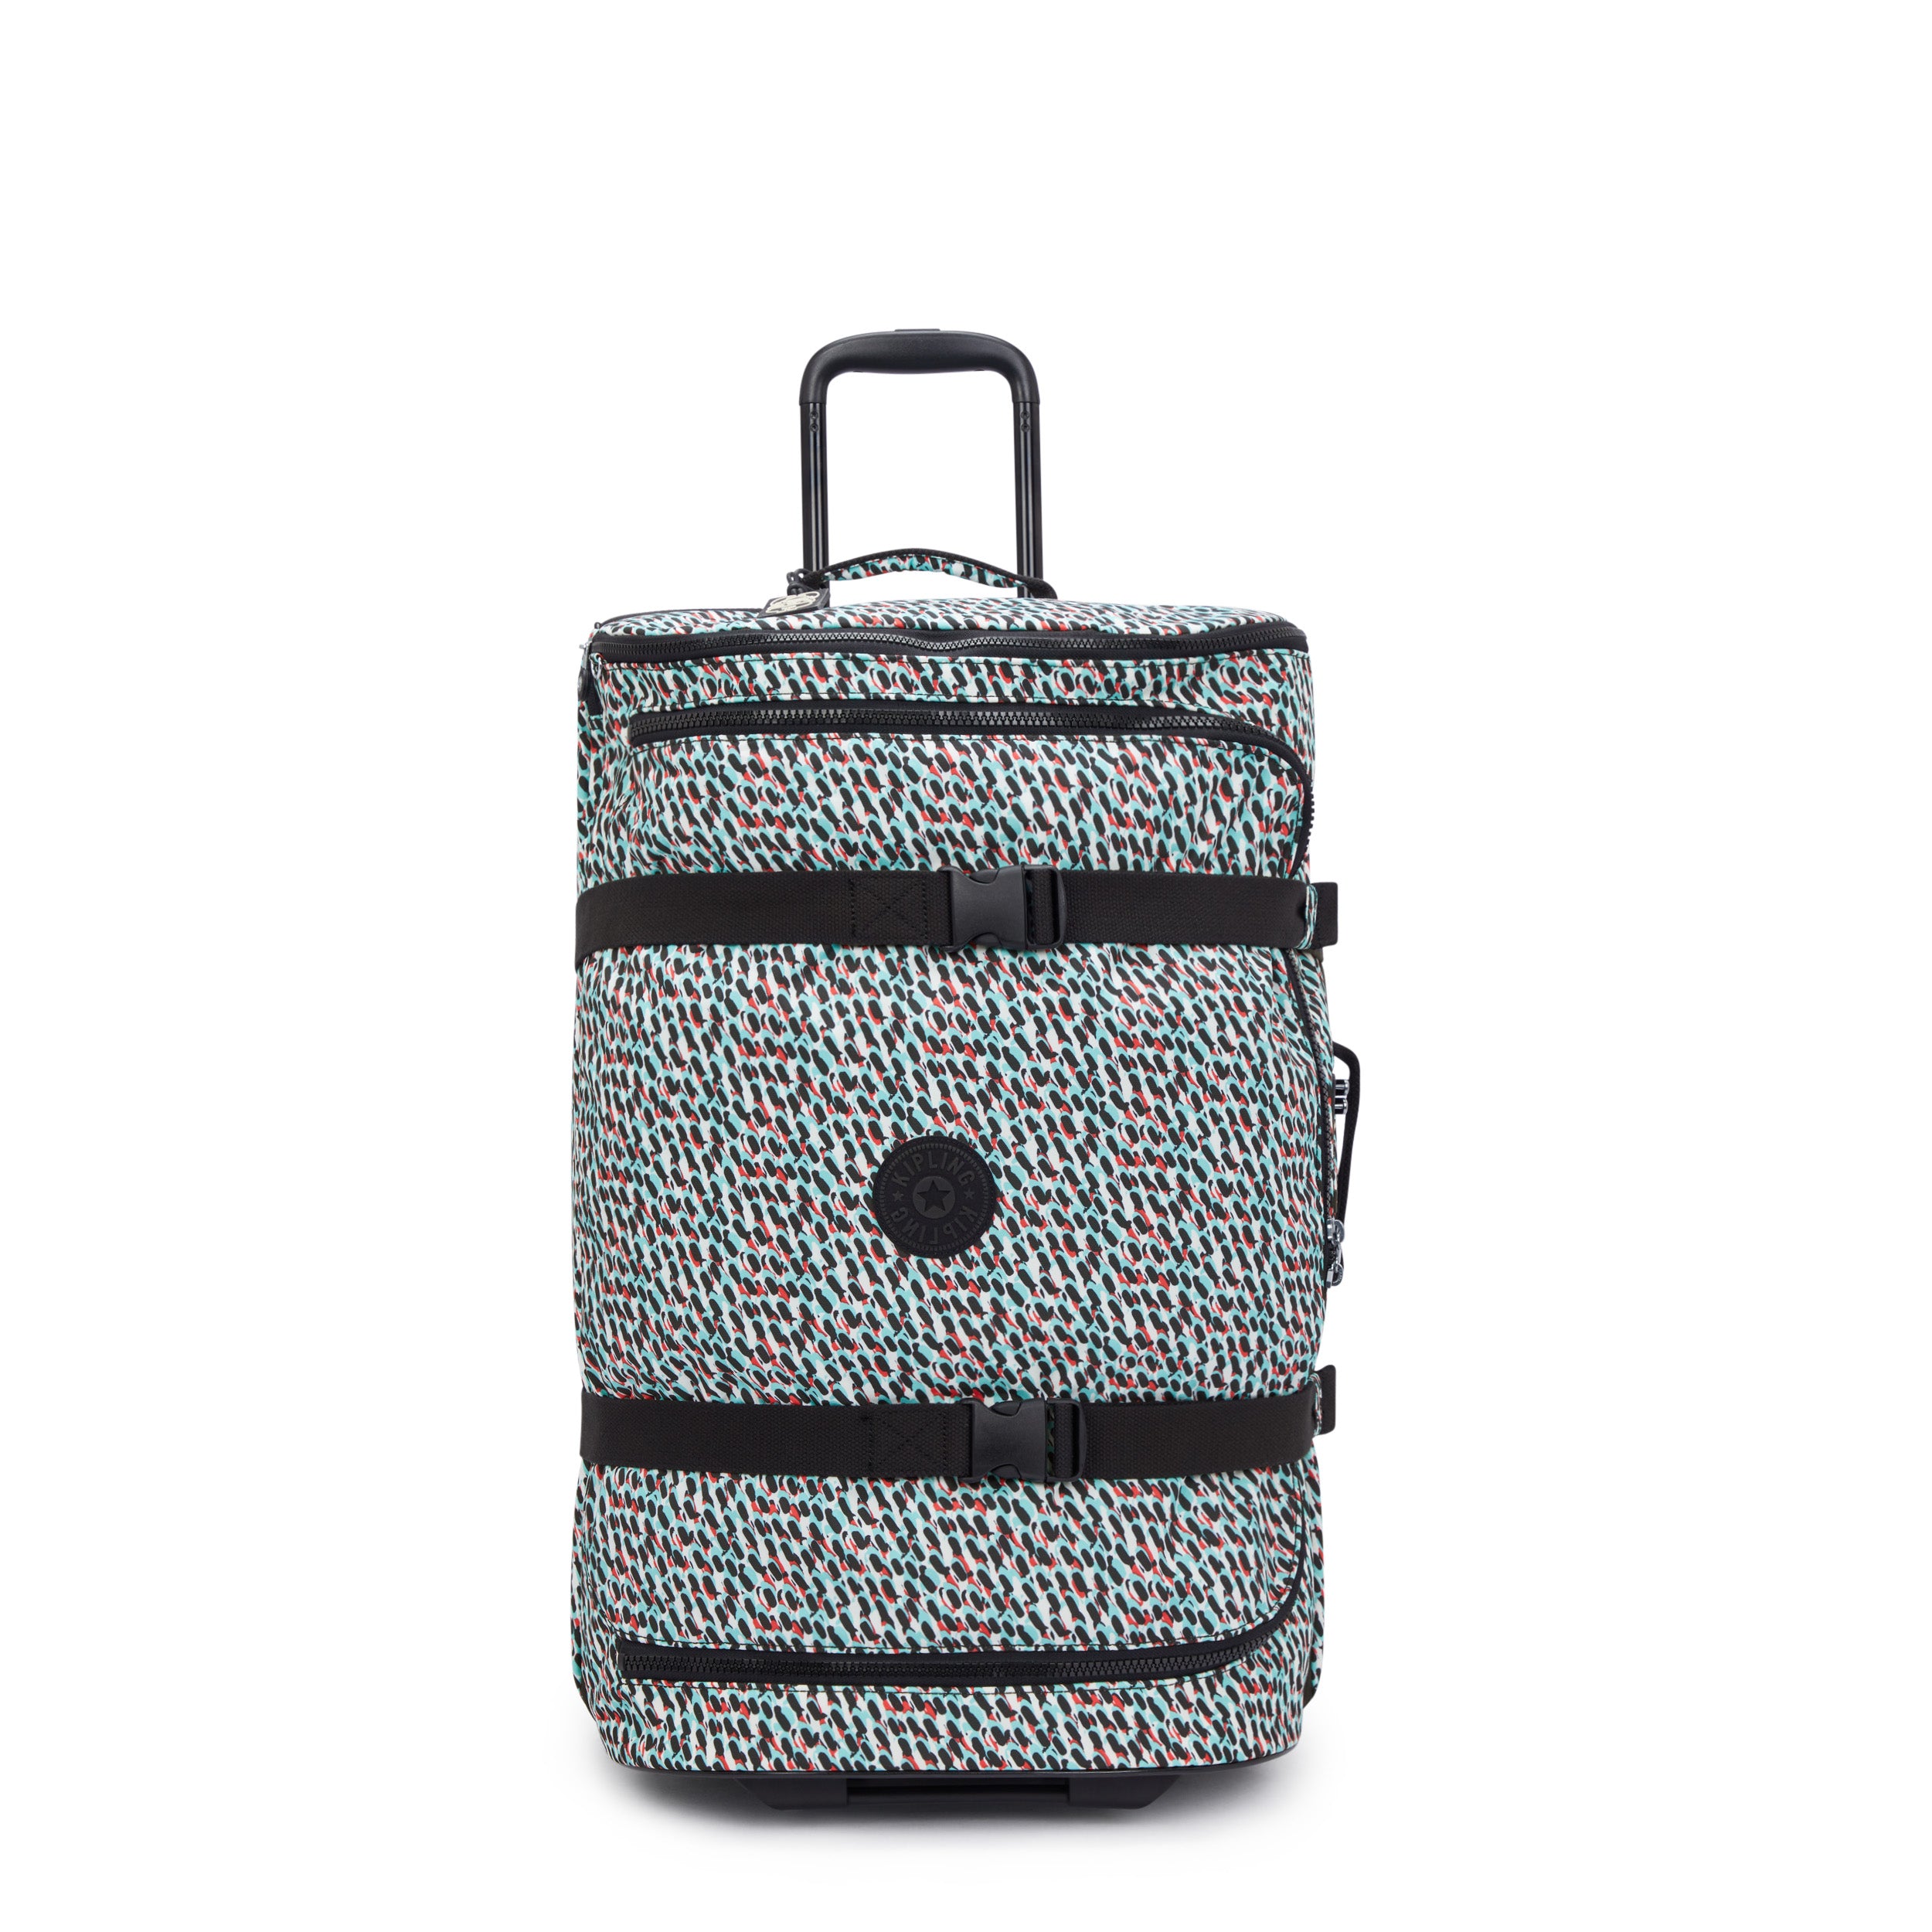 KIPLING-Aviana M-edium Wheeled Suitcase with Adjustable Straps-Abstract Print-I6311-GN6